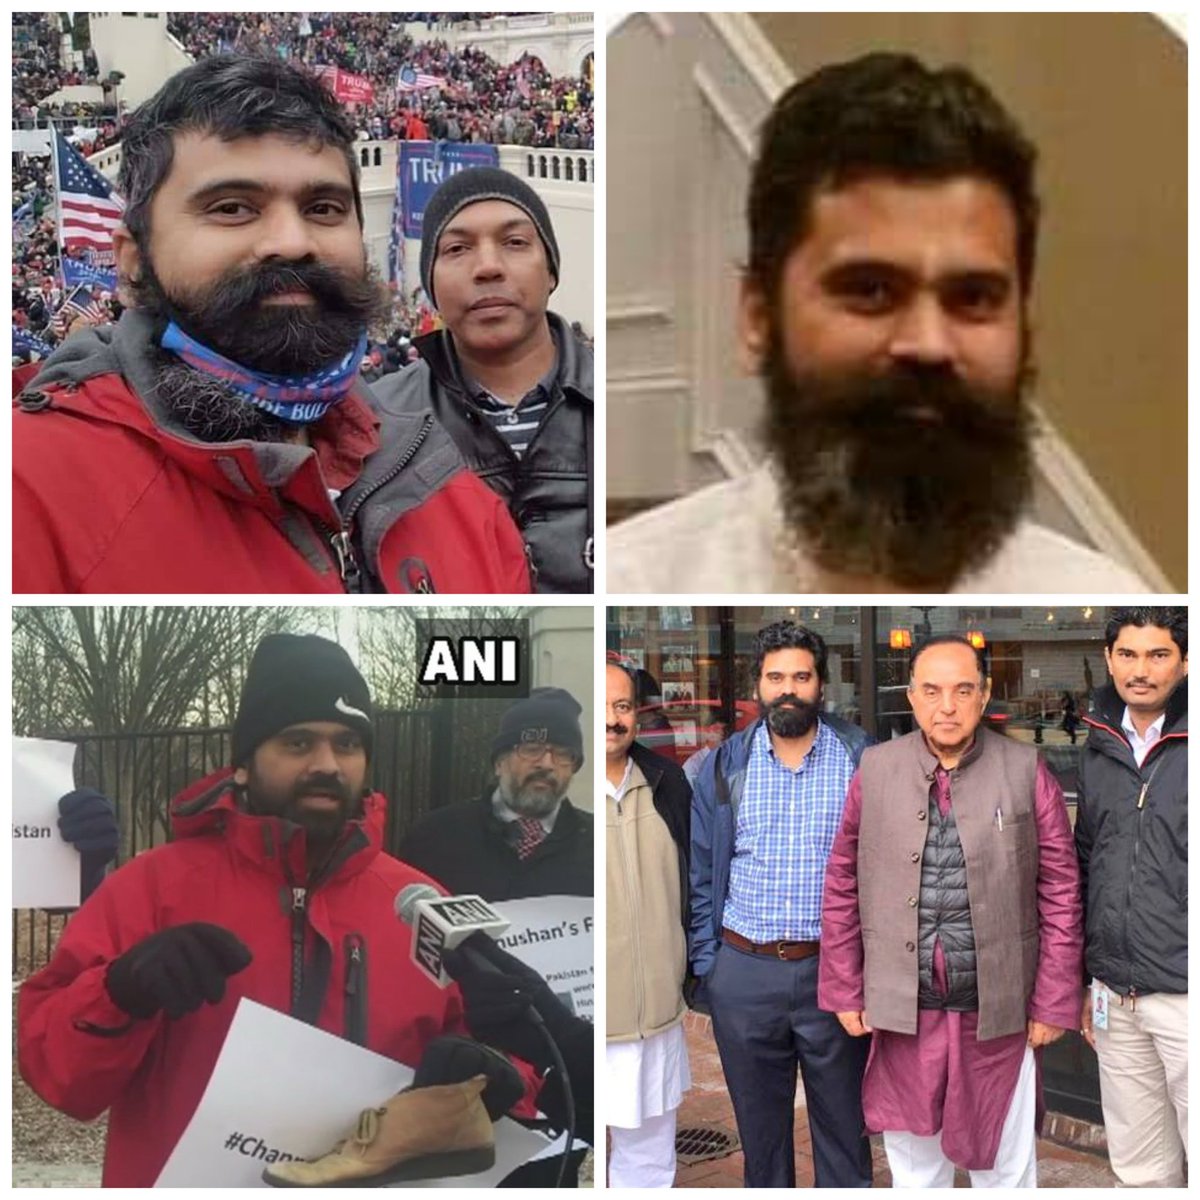 Here is one more collage of Karyakarta Krishna Gudipati. Pic 1 from recent event.Pic 2 from.his linkedin profilePic 3. During his interview to ANI in 2018. Compare the jacket he wore in 2018 and 2021.